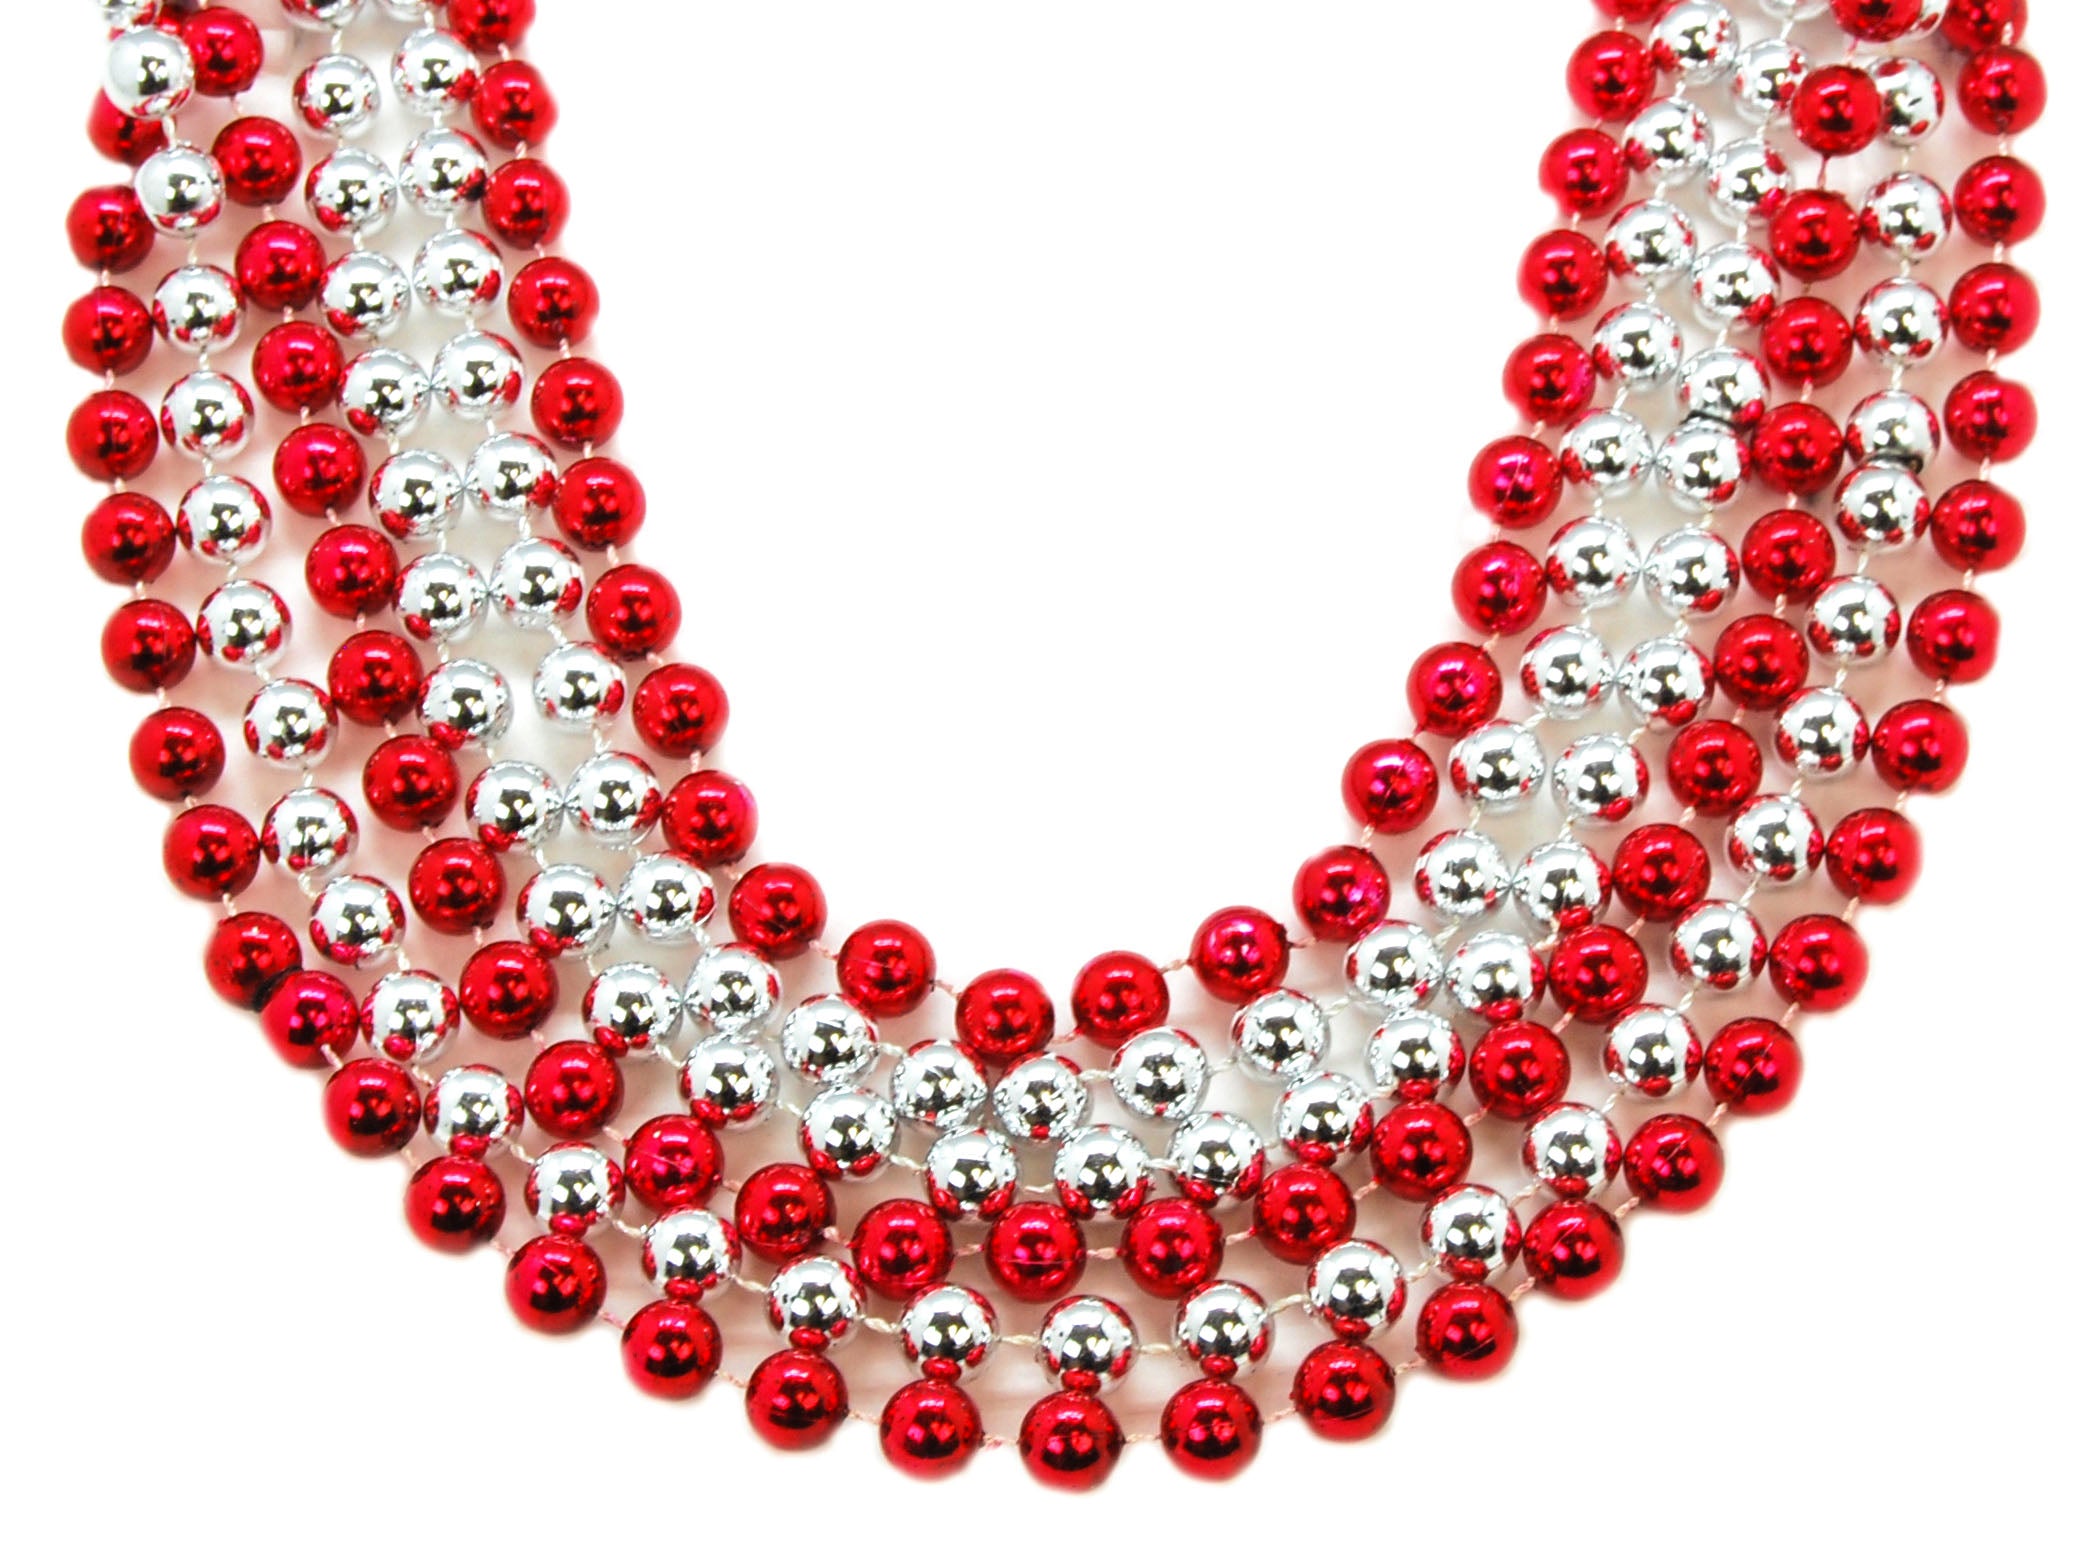 12mm Red and Silver Round Beads